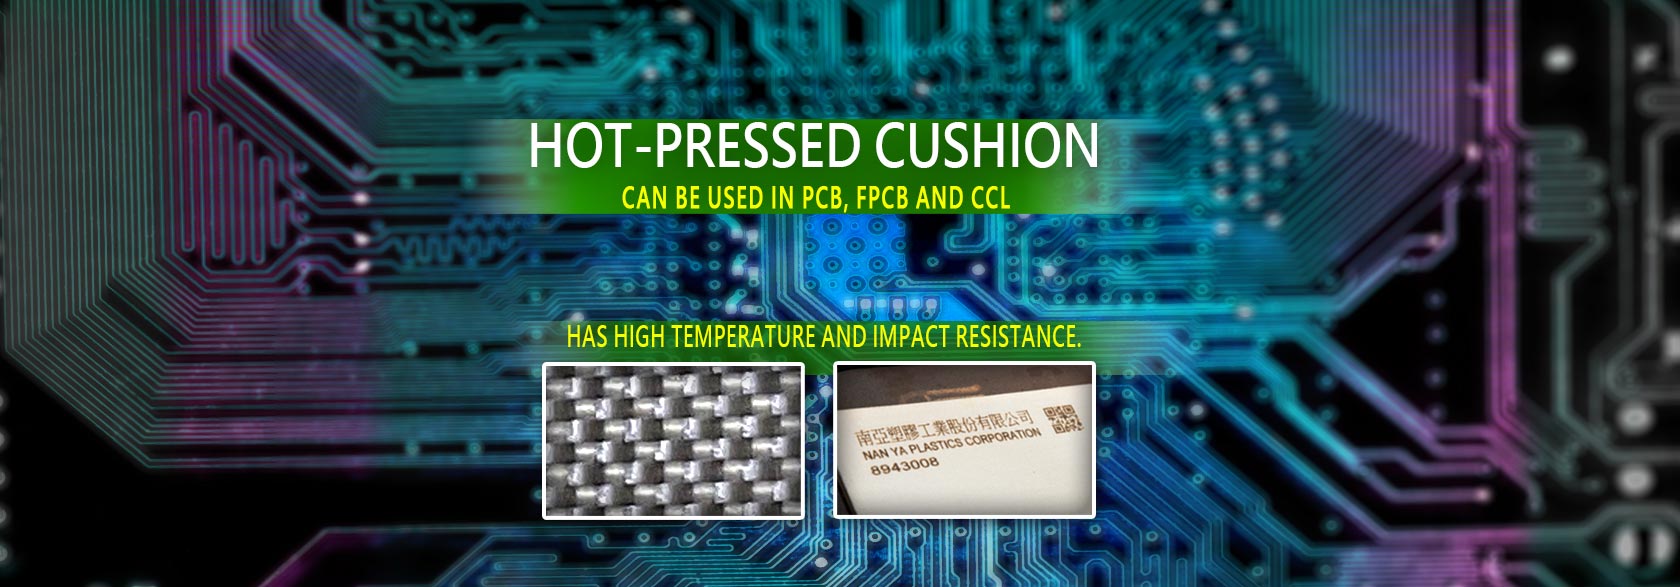 Hot-pressed cushion is a glass fabric composite.
NAN YA Glass fabric cushion